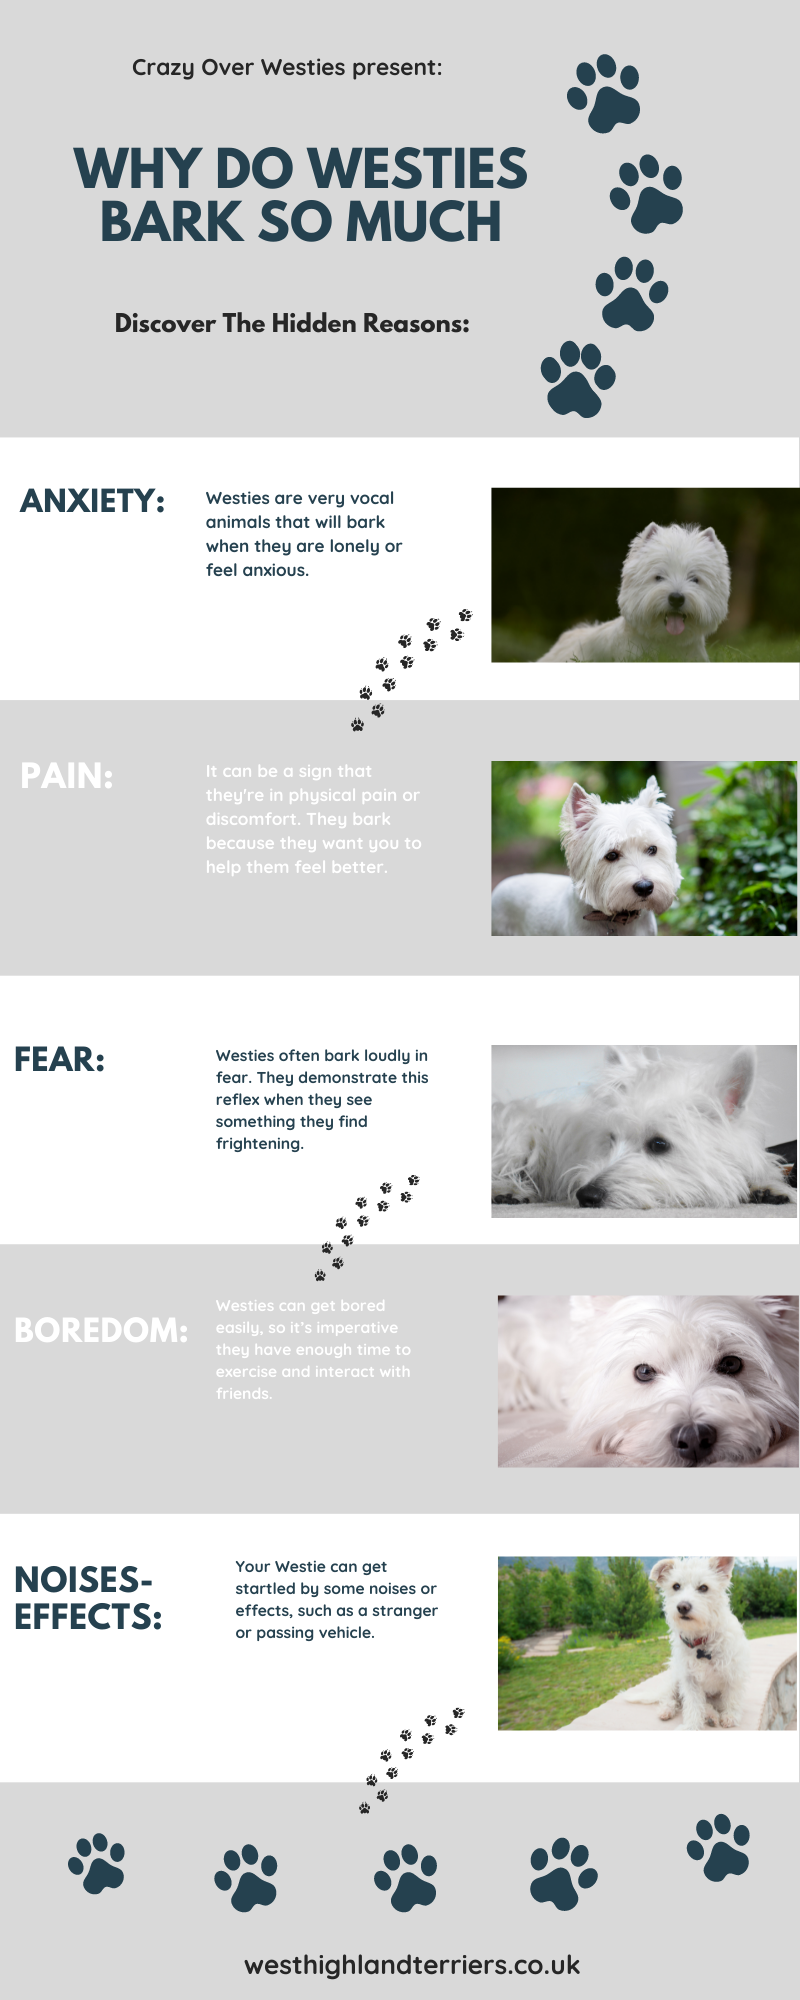 Why Do Westies Bark So Much Infographic: